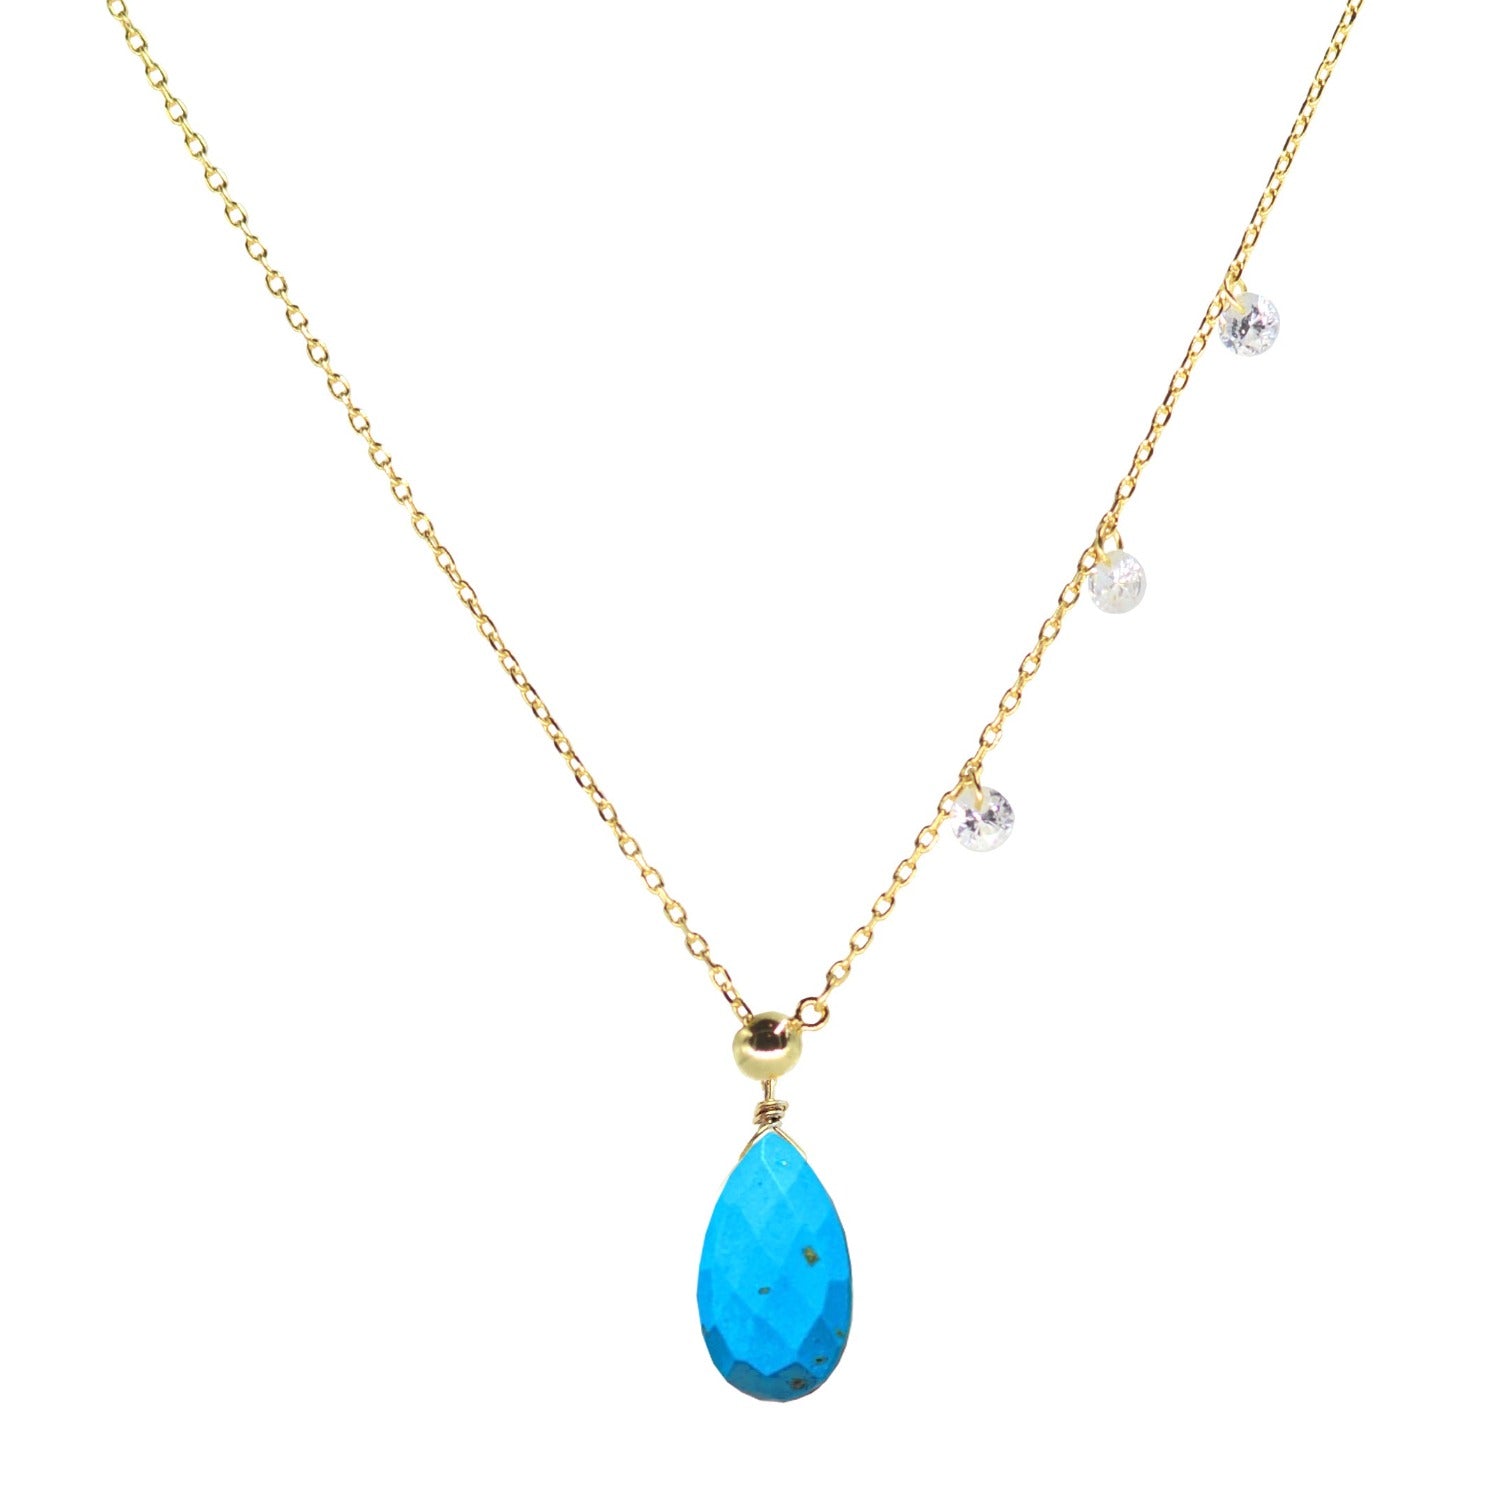 double slider lariat necklace with turquoise drop